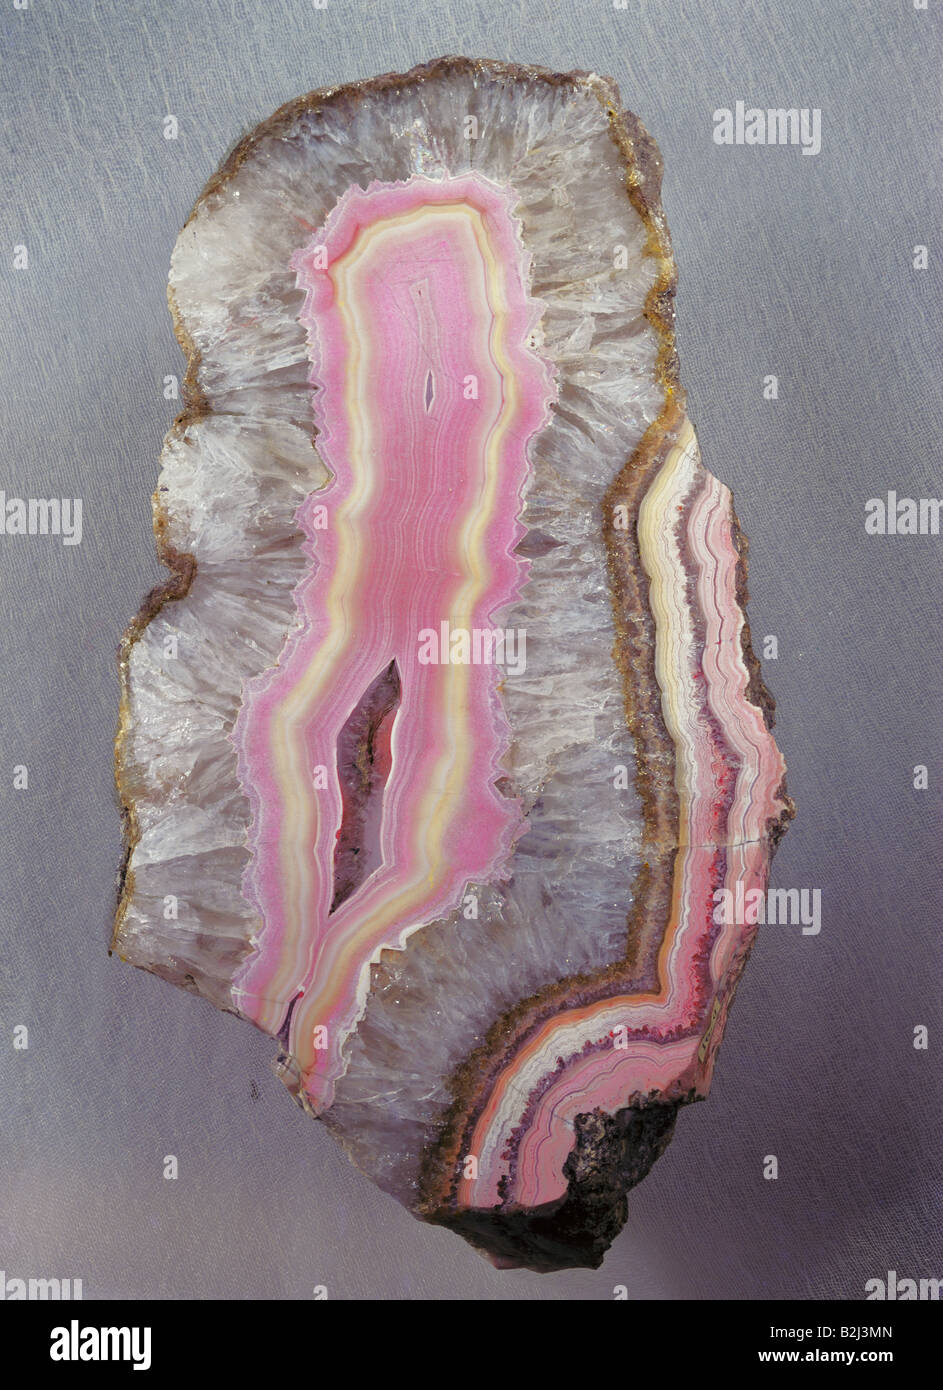 Geologie, Mineralien, Achat, private Sammlung, Additional-Rights - Clearance-Info - Not-Available Stockfoto